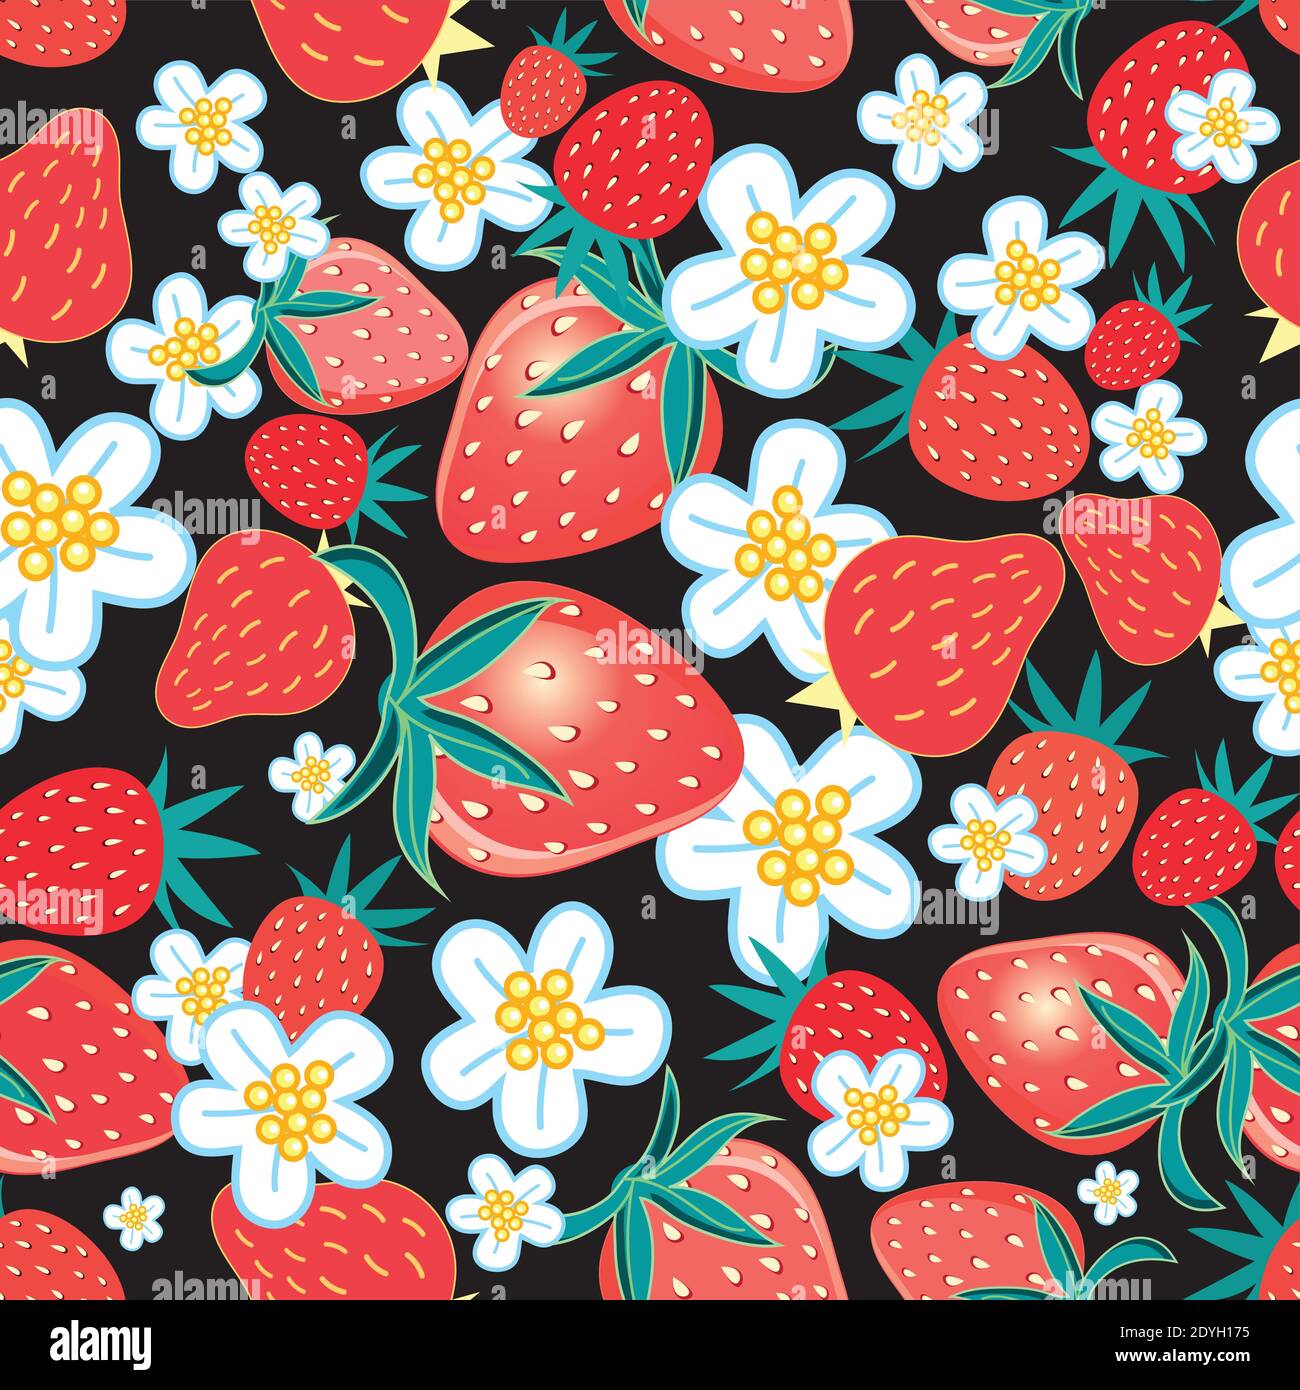 Seamless multicolored pattern of strawberries and flowers on a dark background. Example of a strawberry pattern for packaging and advertising Stock Vector